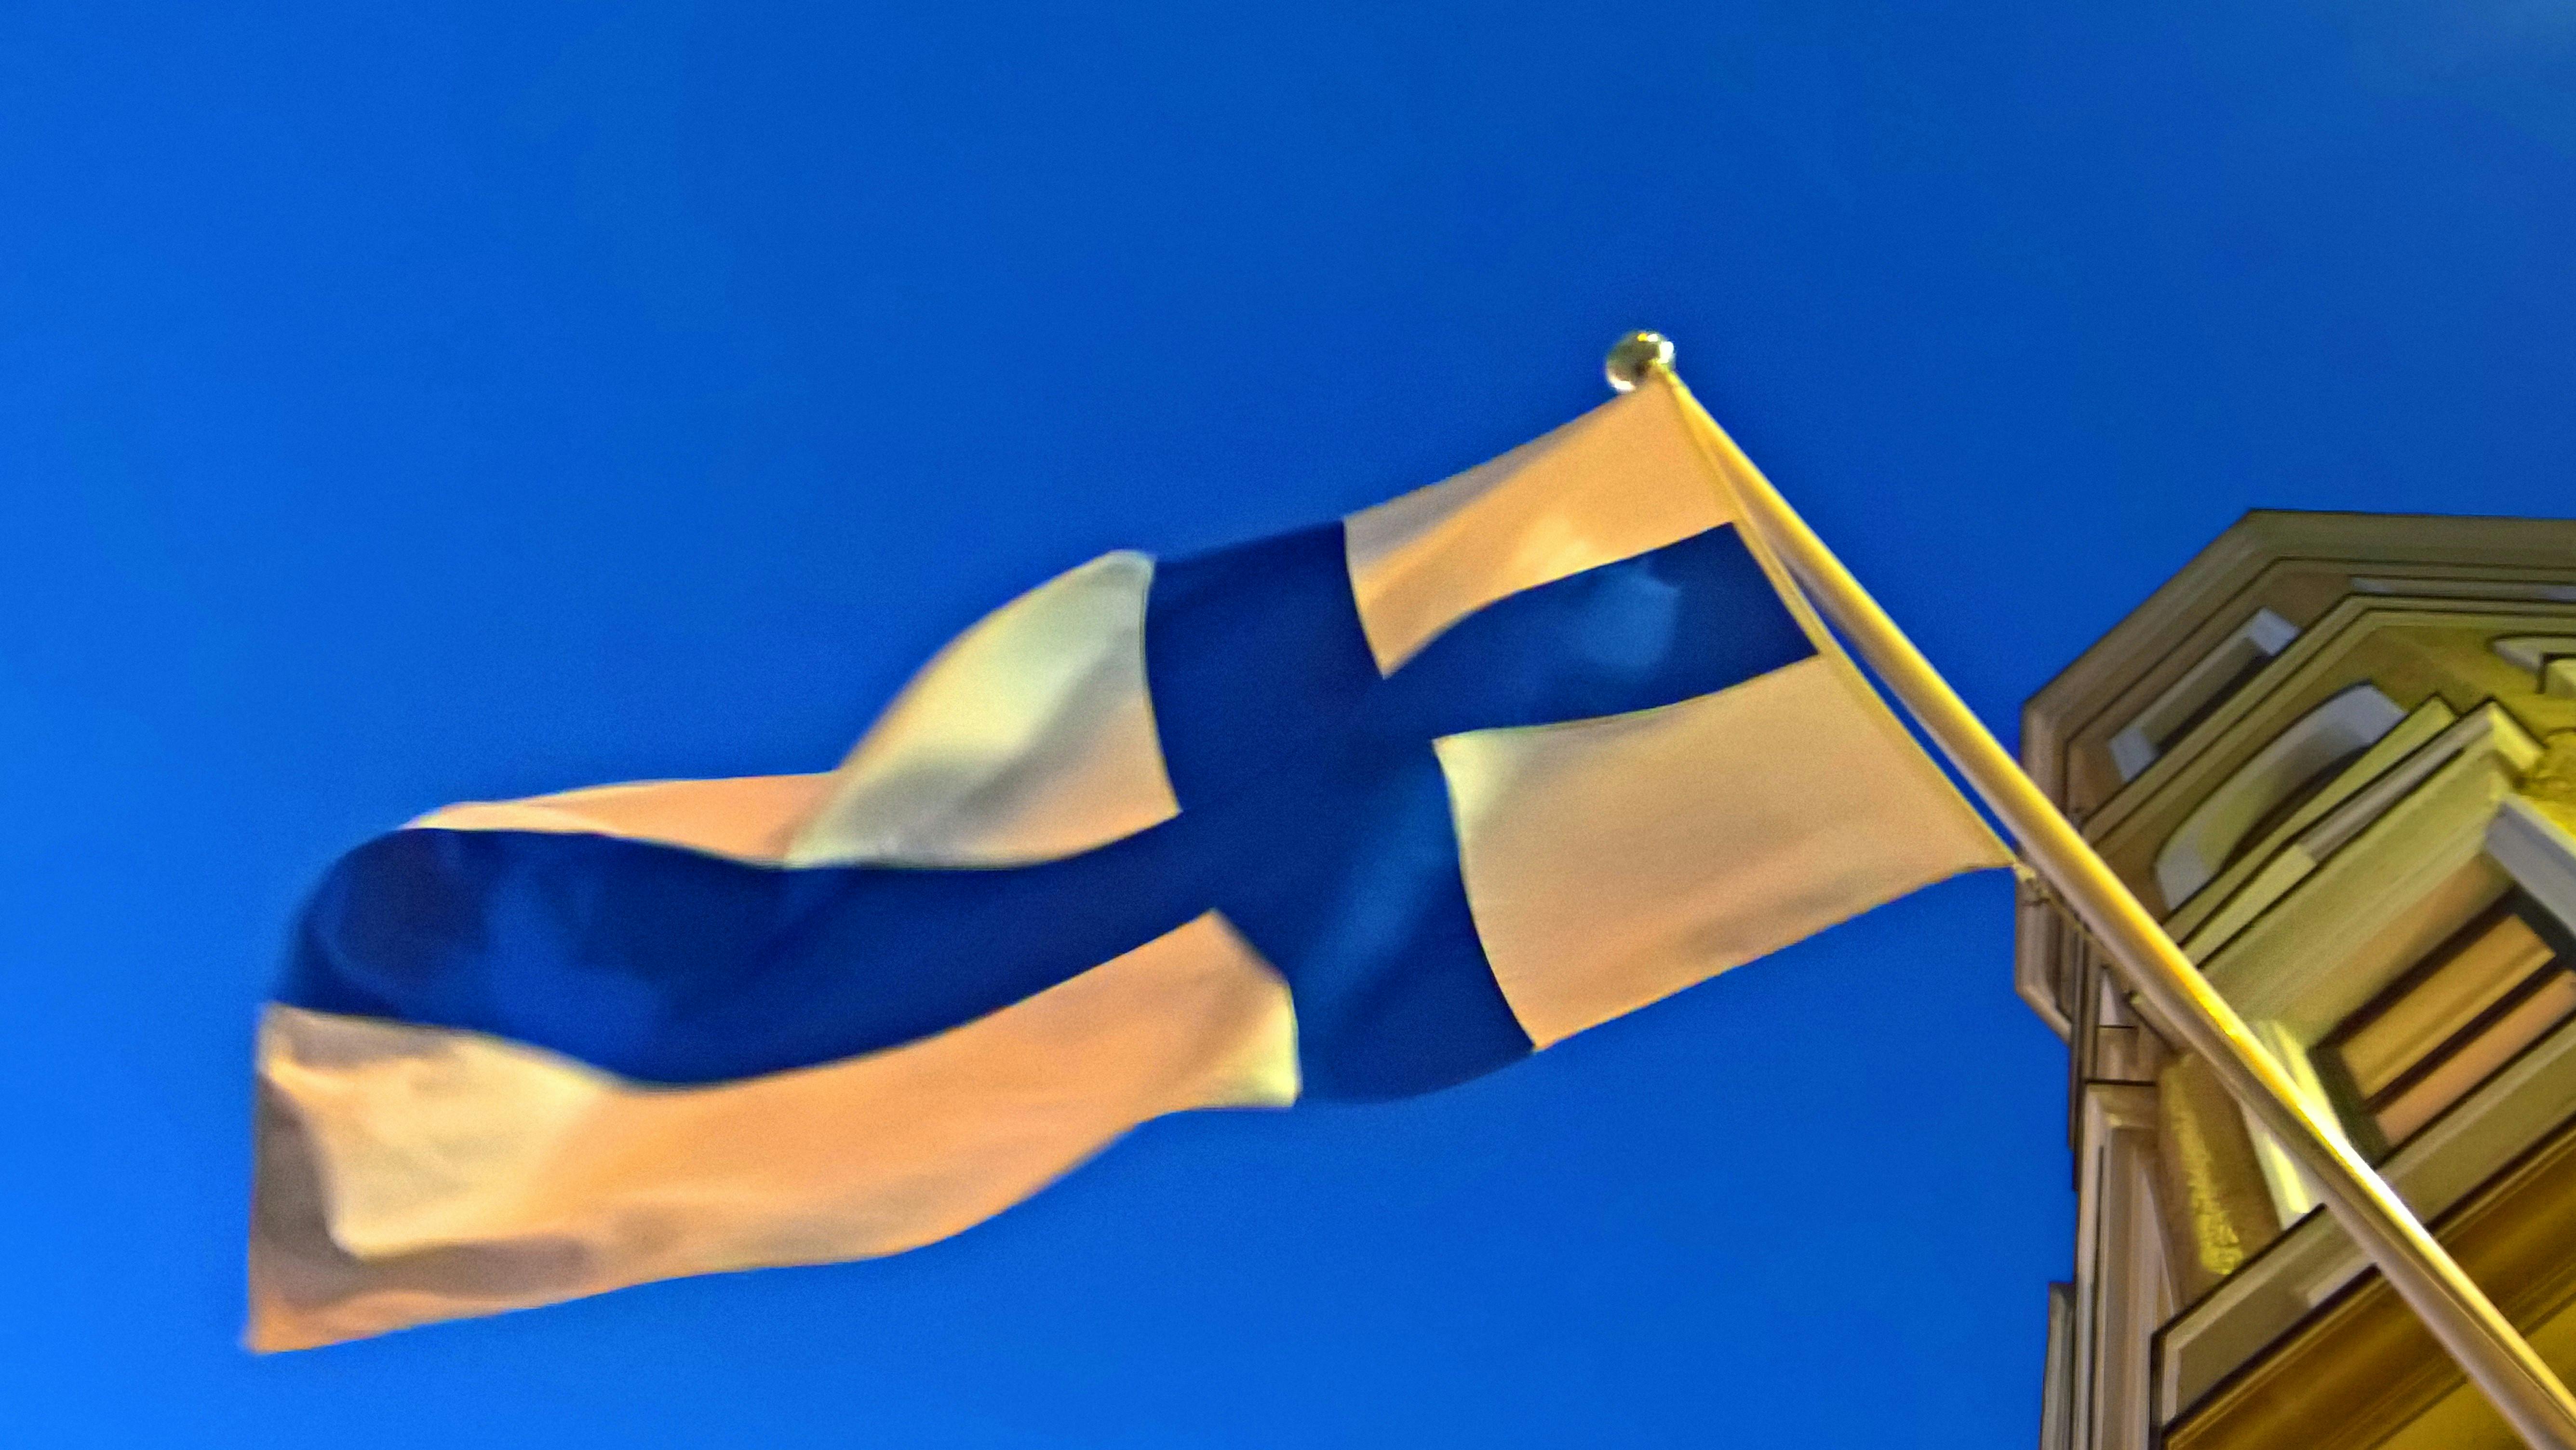 Free stock photo of 6.12, finland 100 years, finnish flag